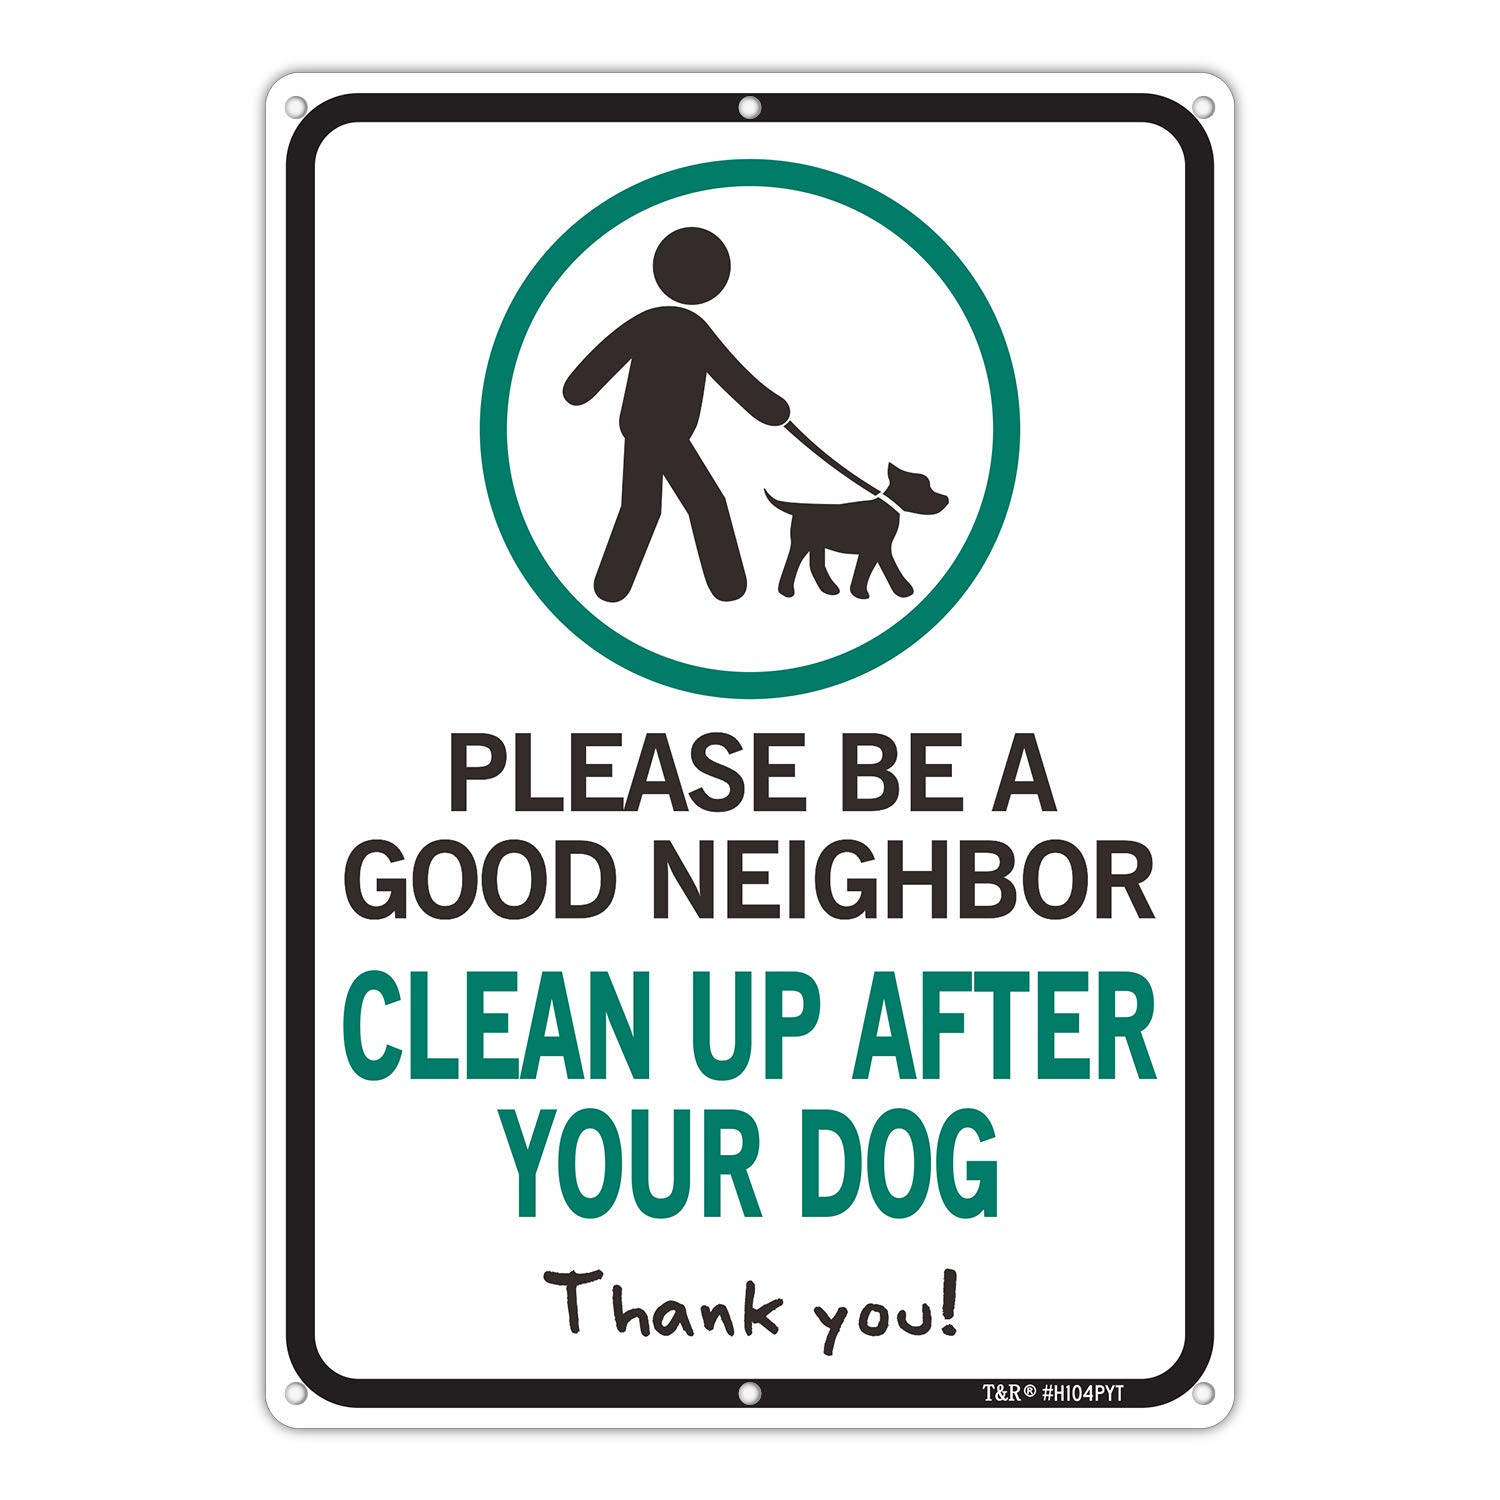 Please Be A Good Neighbor Clean Up After Your Dog Sign, 14 x 10 x 0.04 inch Aluminum Metal Sign, UV Protected, Waterproof, Weather/Fade Resistant, 6 Pre-drilled Holes, Use for Garden Yard Signs